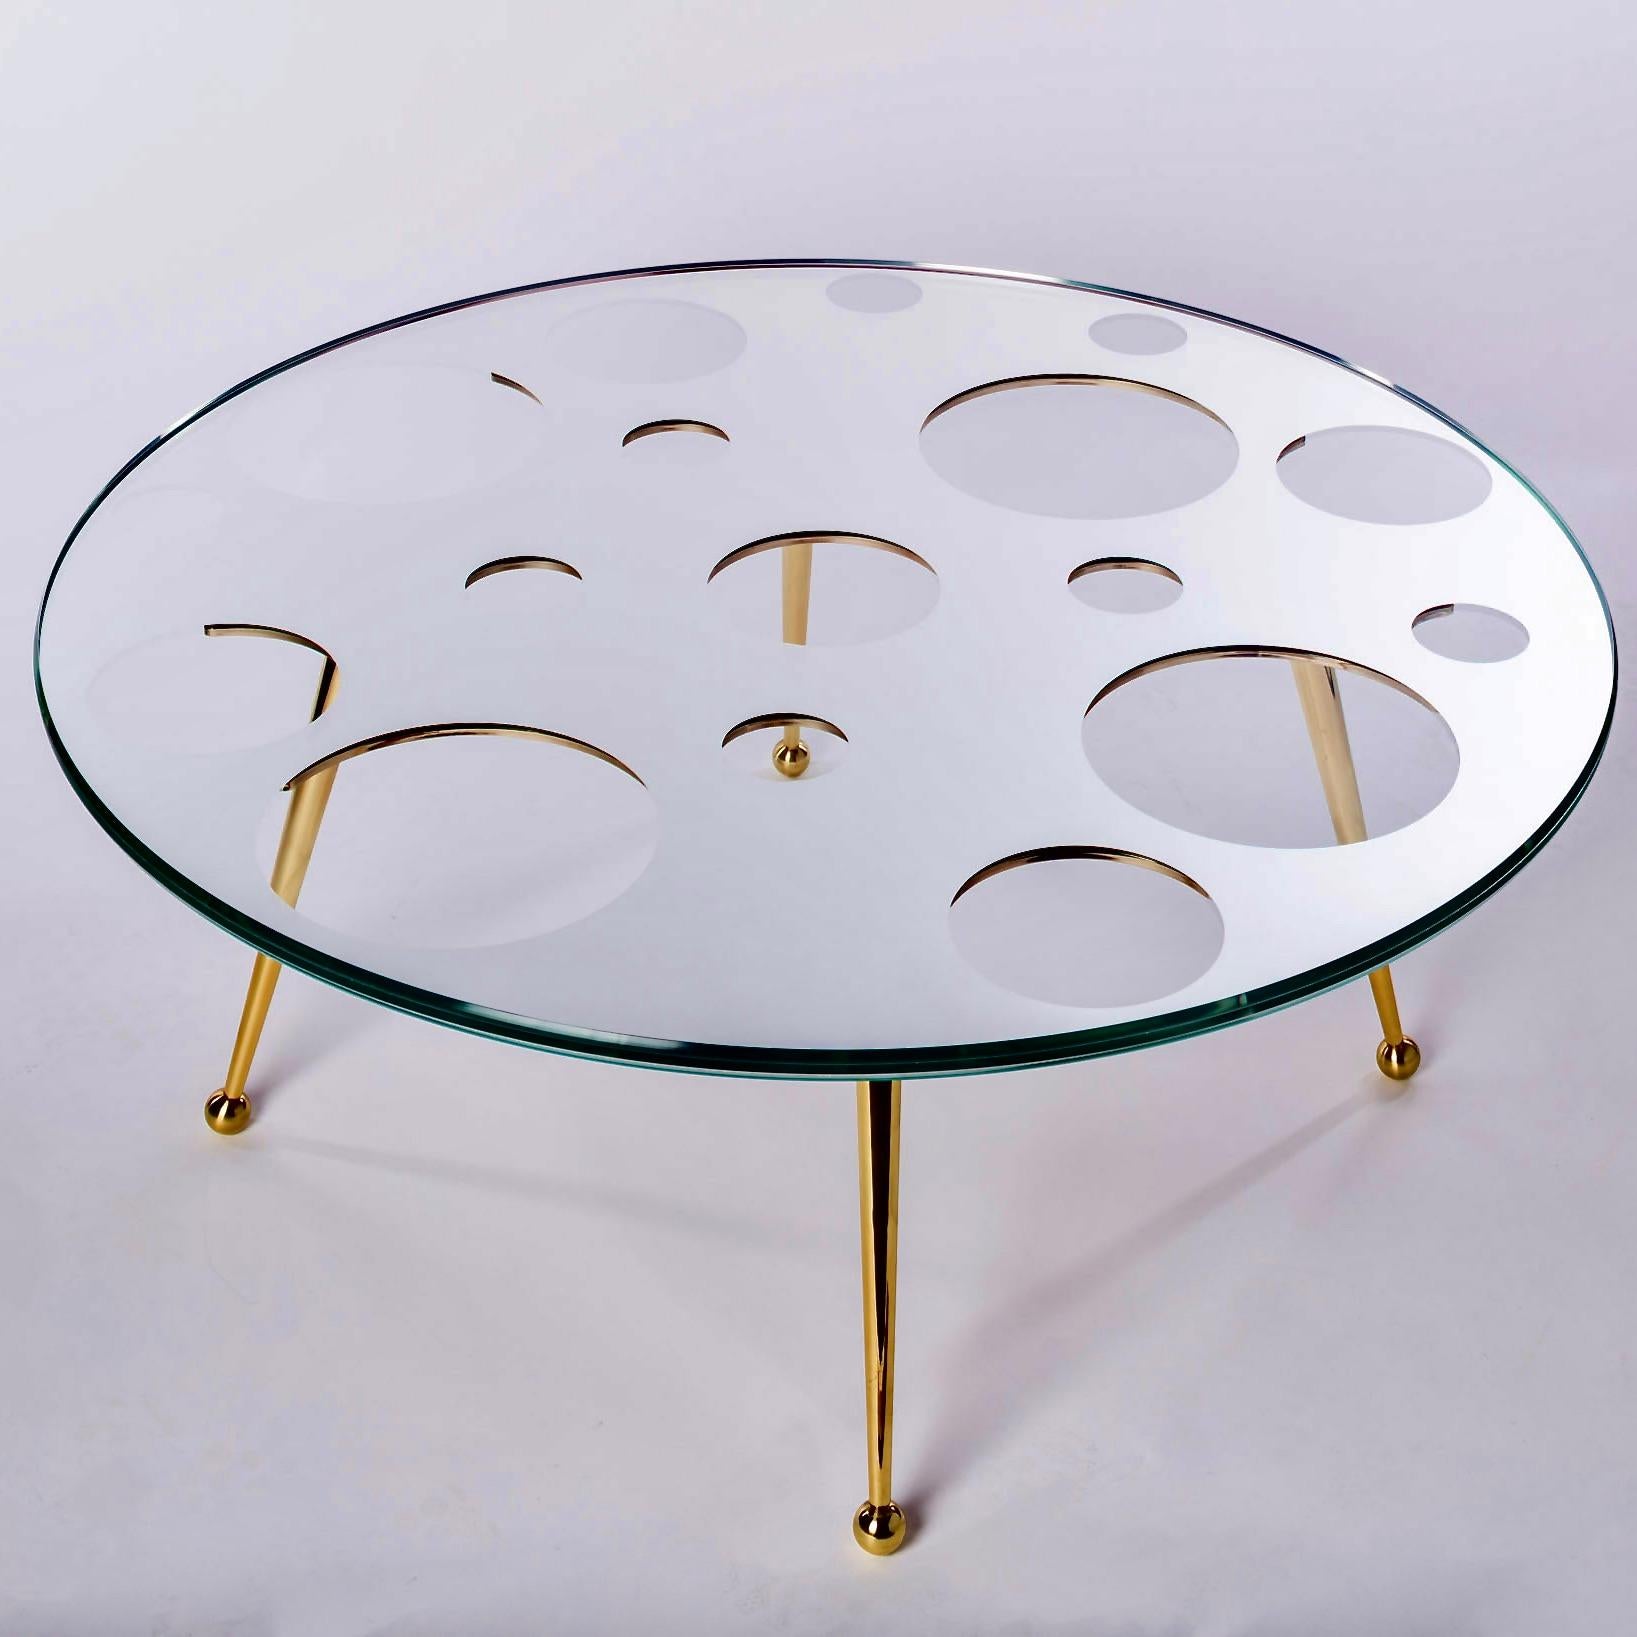 The Holy Mirror Coffee Table is made from solid brass legs and has a very unusual handmade mirror glass top. 

The top is made by taking three equal pieces of Starphire glass, the middle section is taken to a printer that digitally prints a mirror